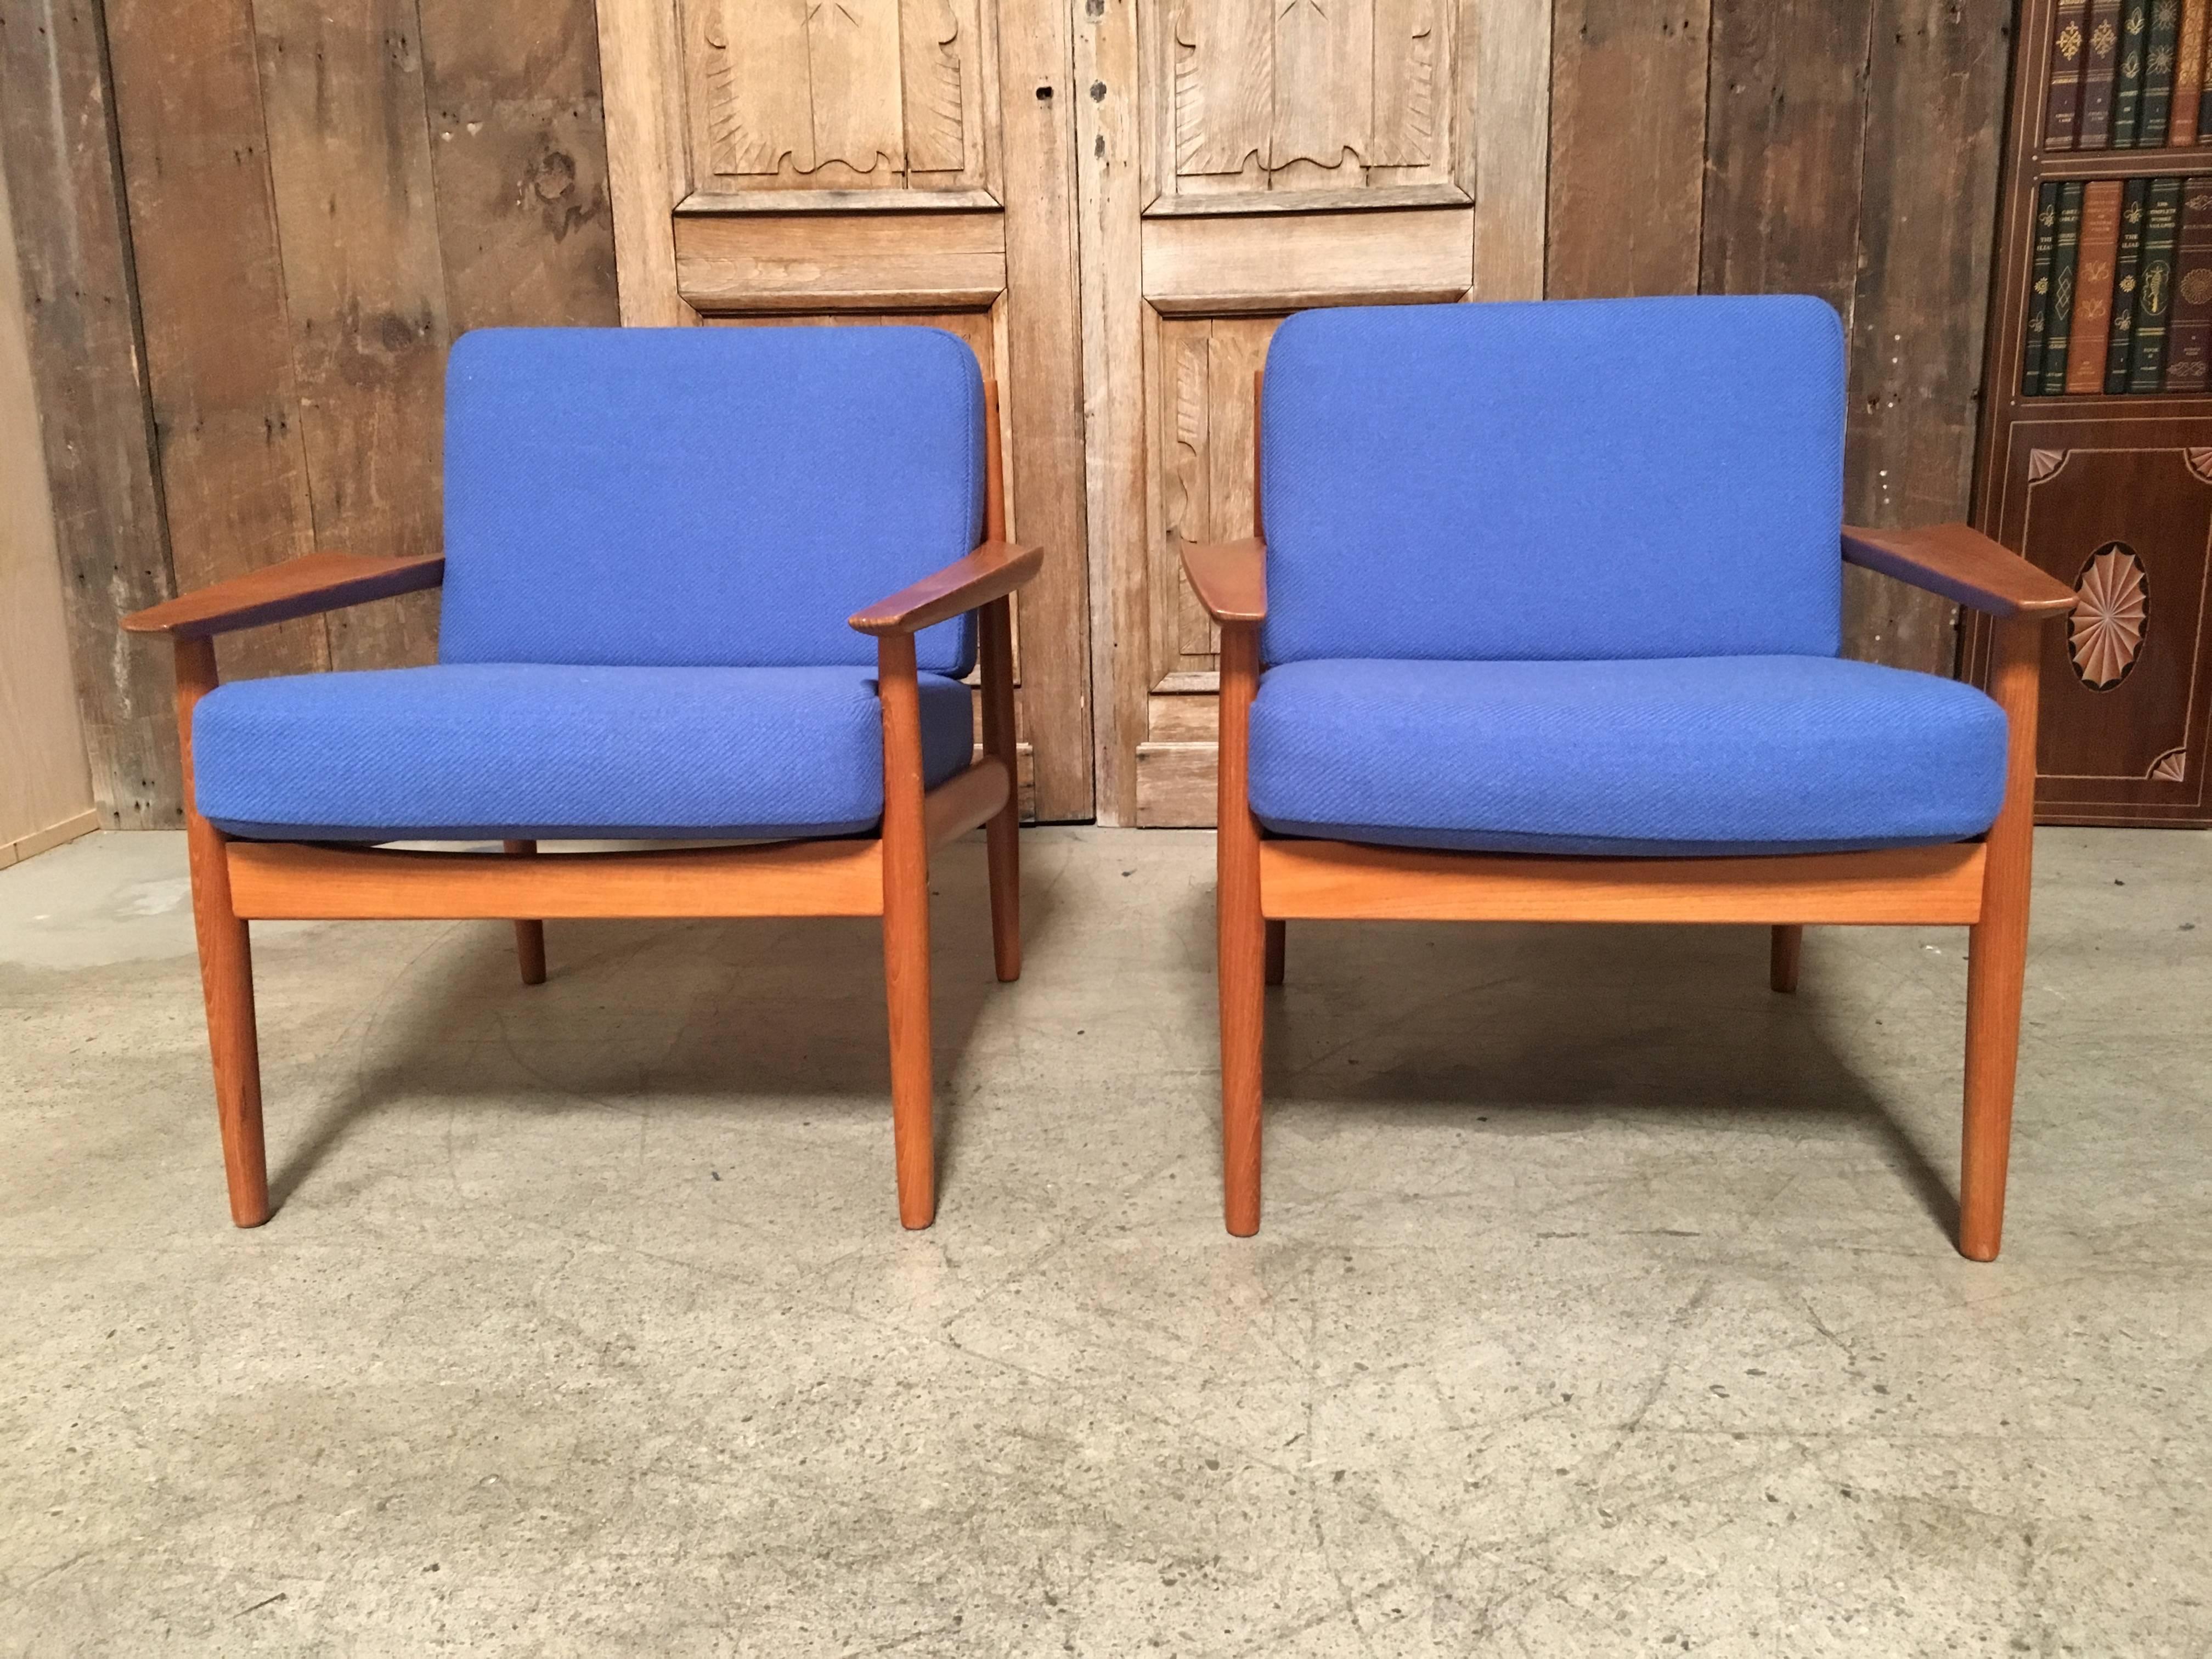 20th Century Pair of Danish Modern Lounge Chairs by Arne Vodder